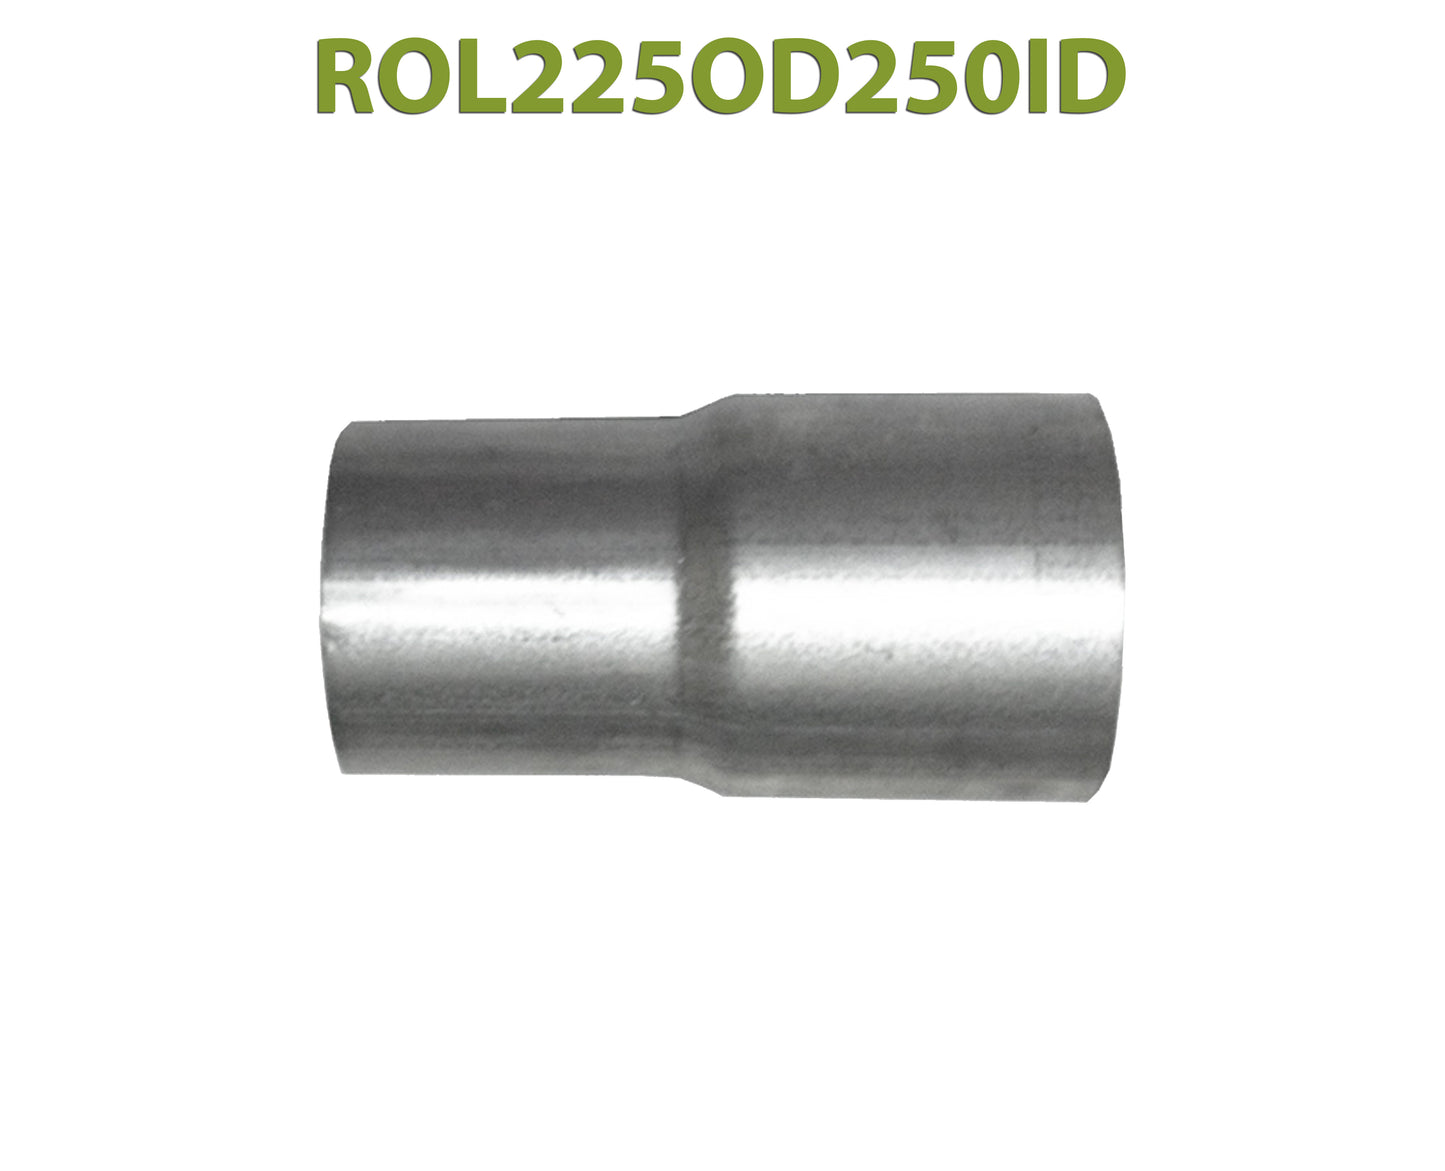 ROL225OD250ID 548518 2 1/4” OD to 2 1/2” ID Universal Exhaust Component to Pipe Adapter Reducer